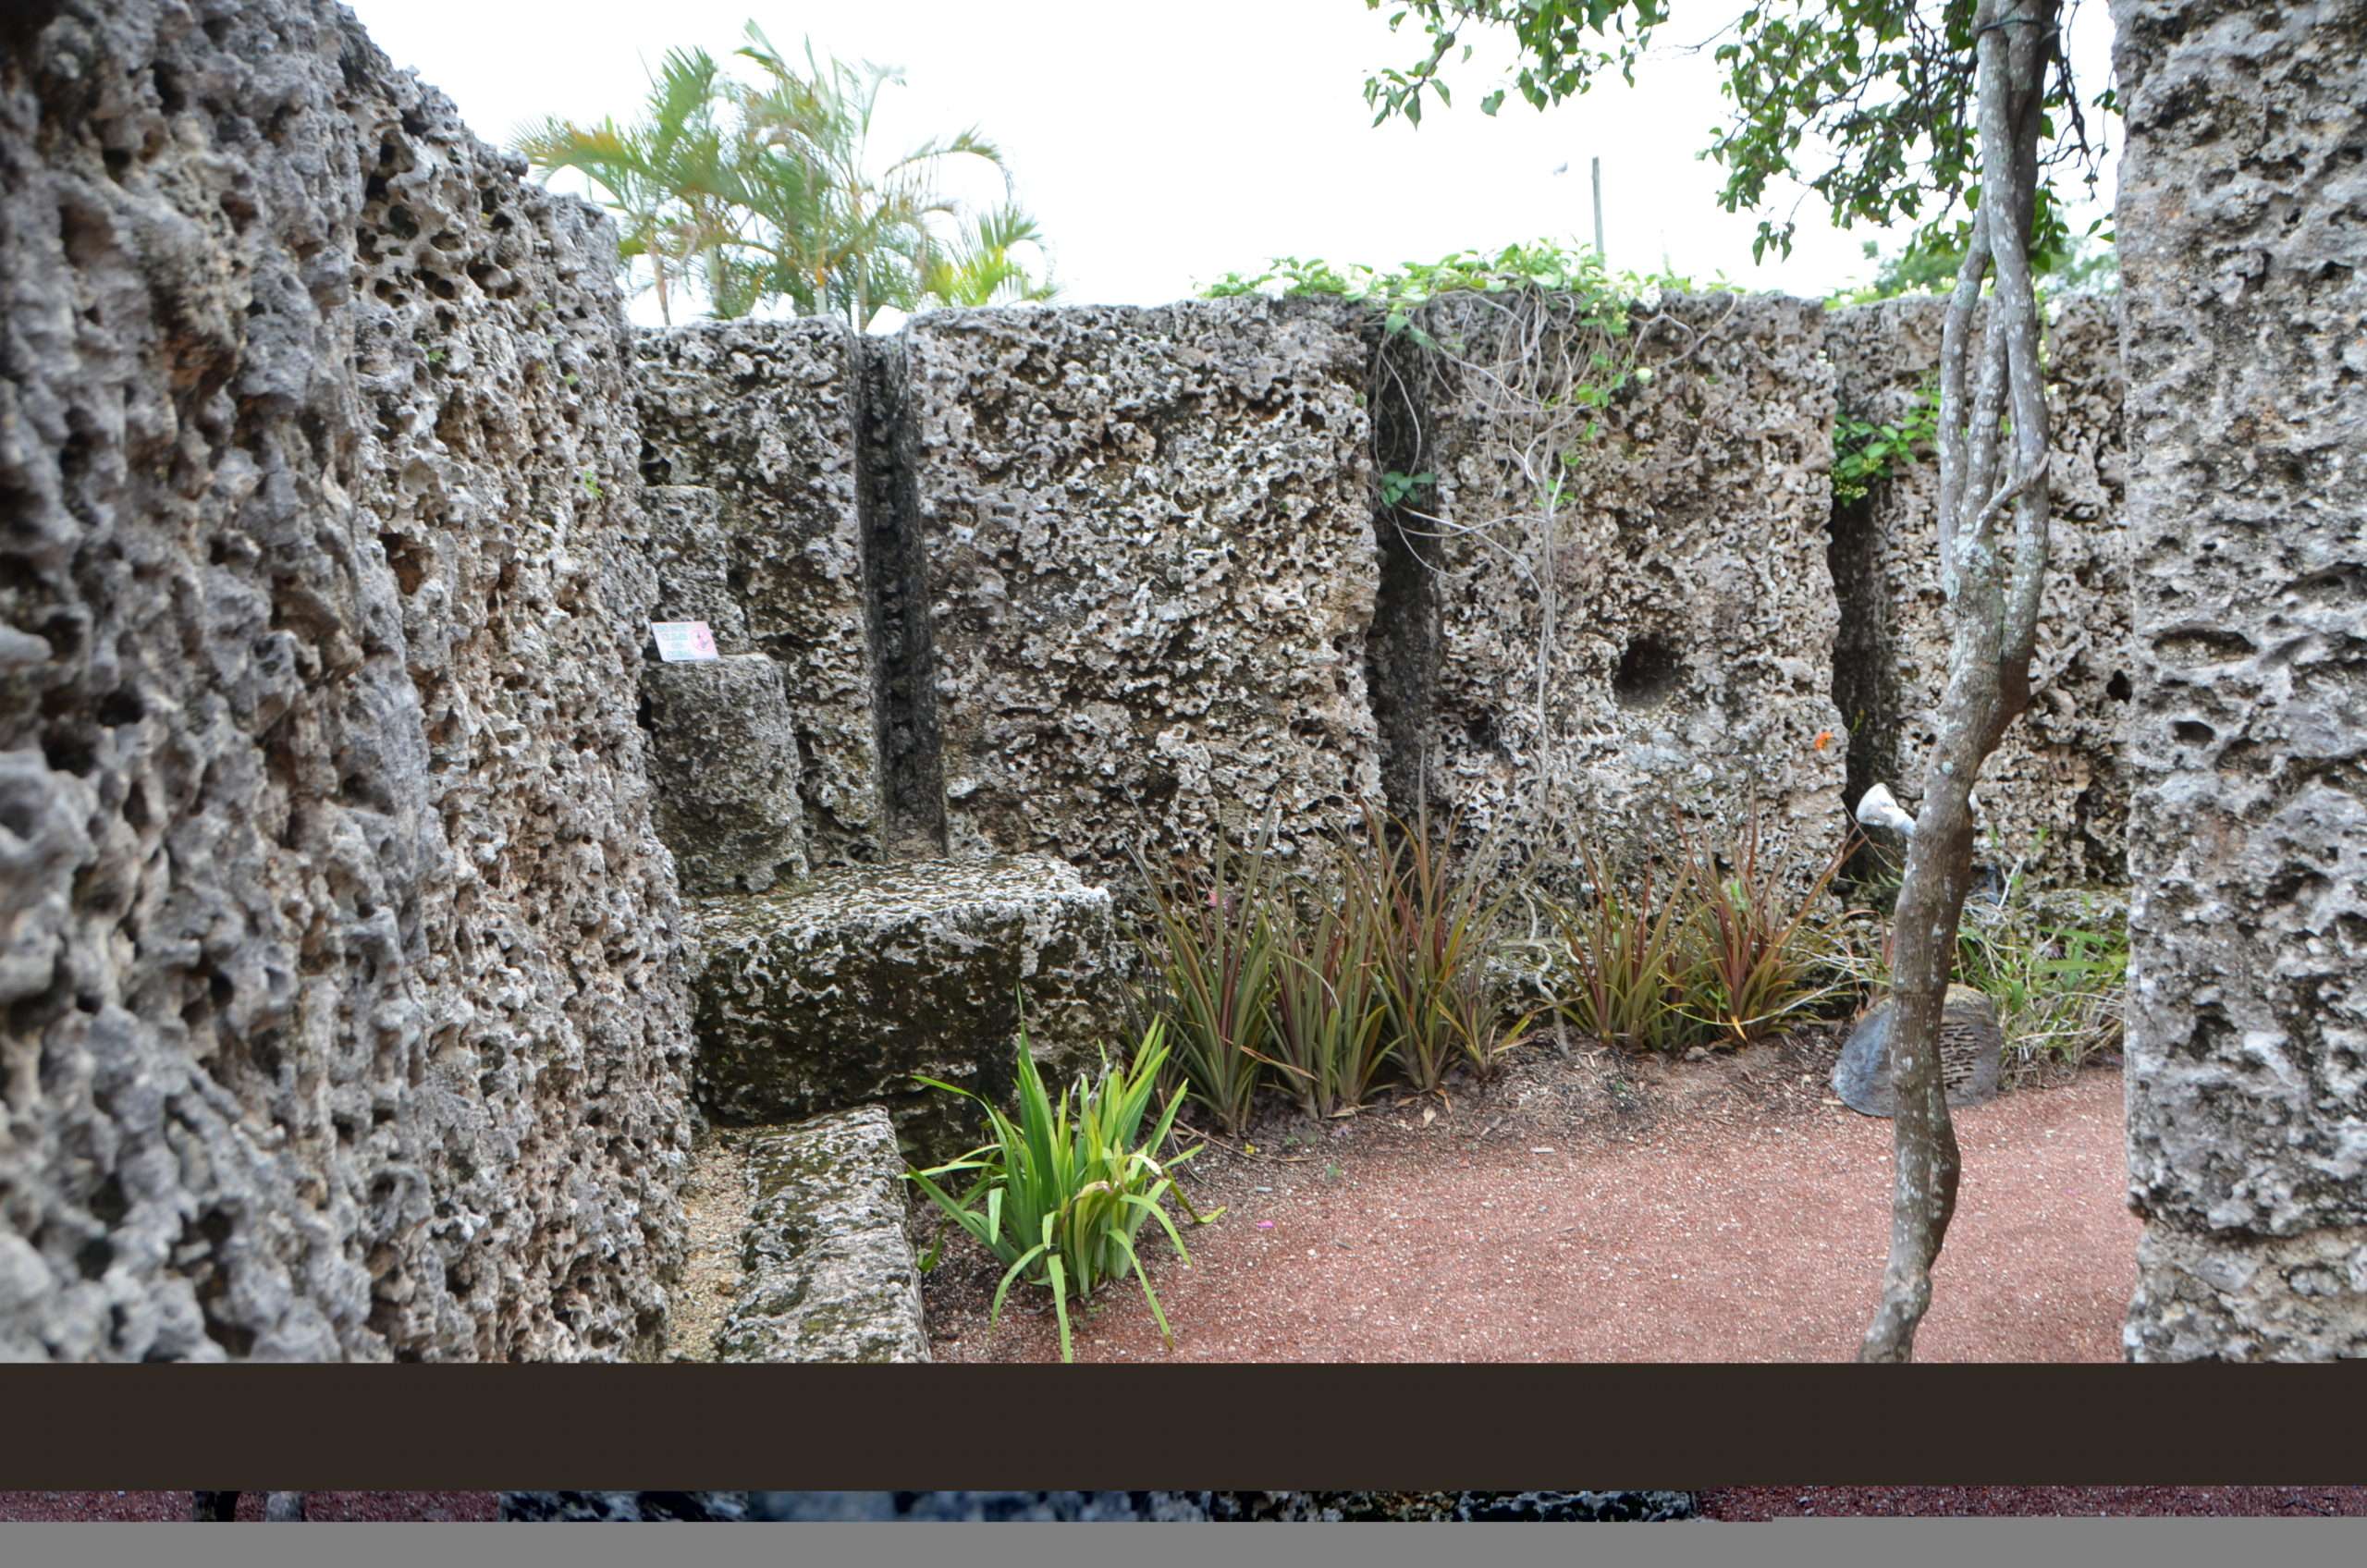 Coral Castle: Megalithic Mystery or Romantic Testimonial? 10